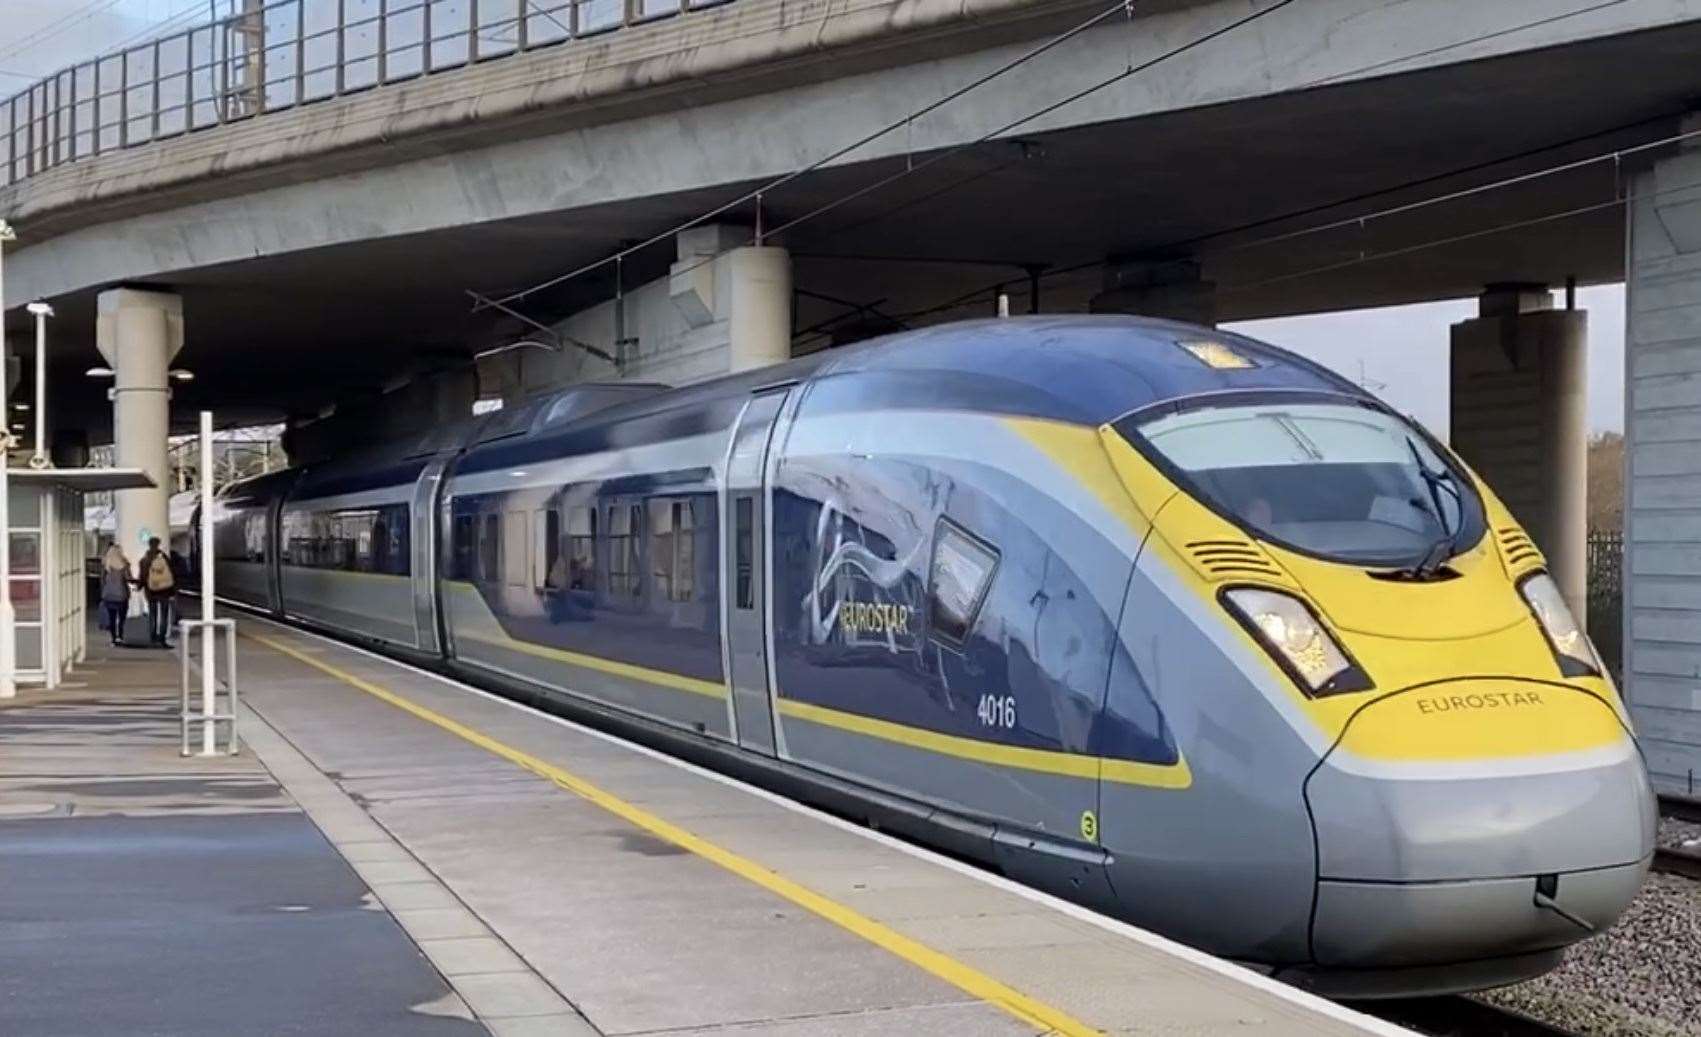 One of the last Eurostar trains pulled into Ebbsfleet International Station in February this year. Picture: Steve Salter